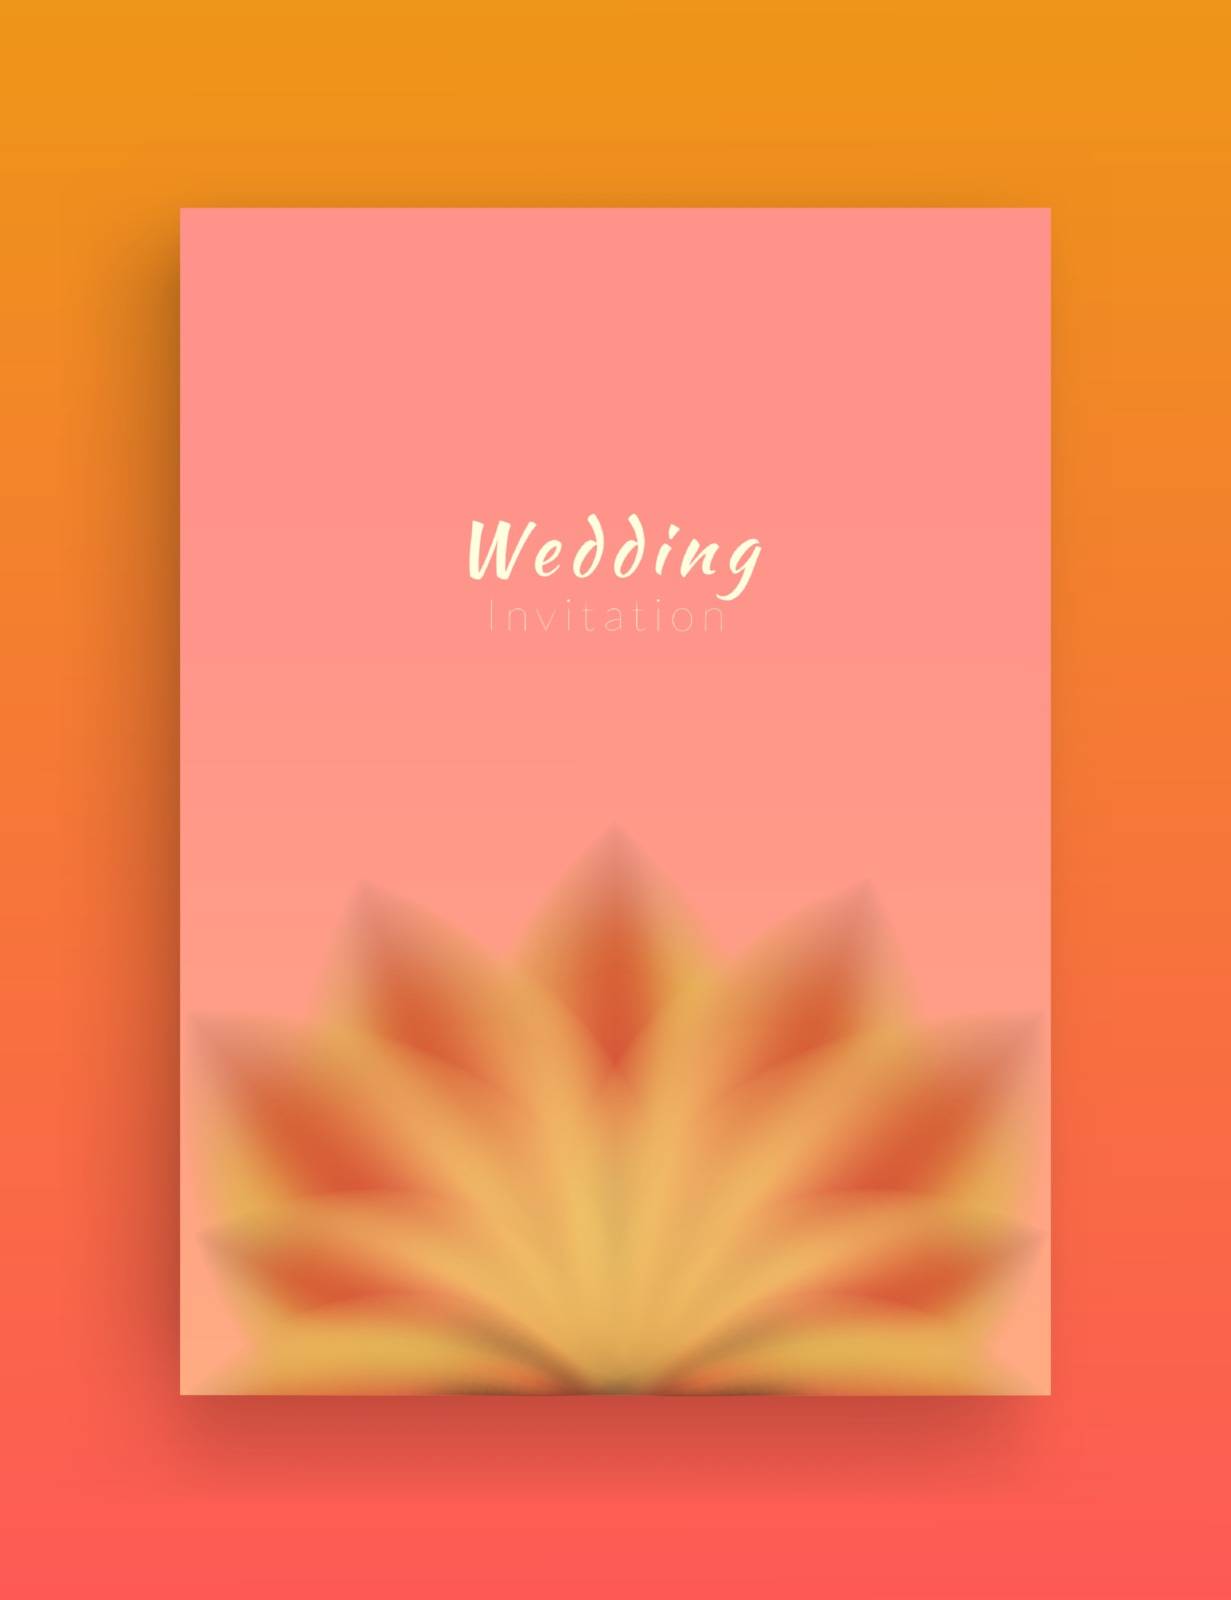 Minimalist Invitation card design with decorative elements of flower petals and soft colors.